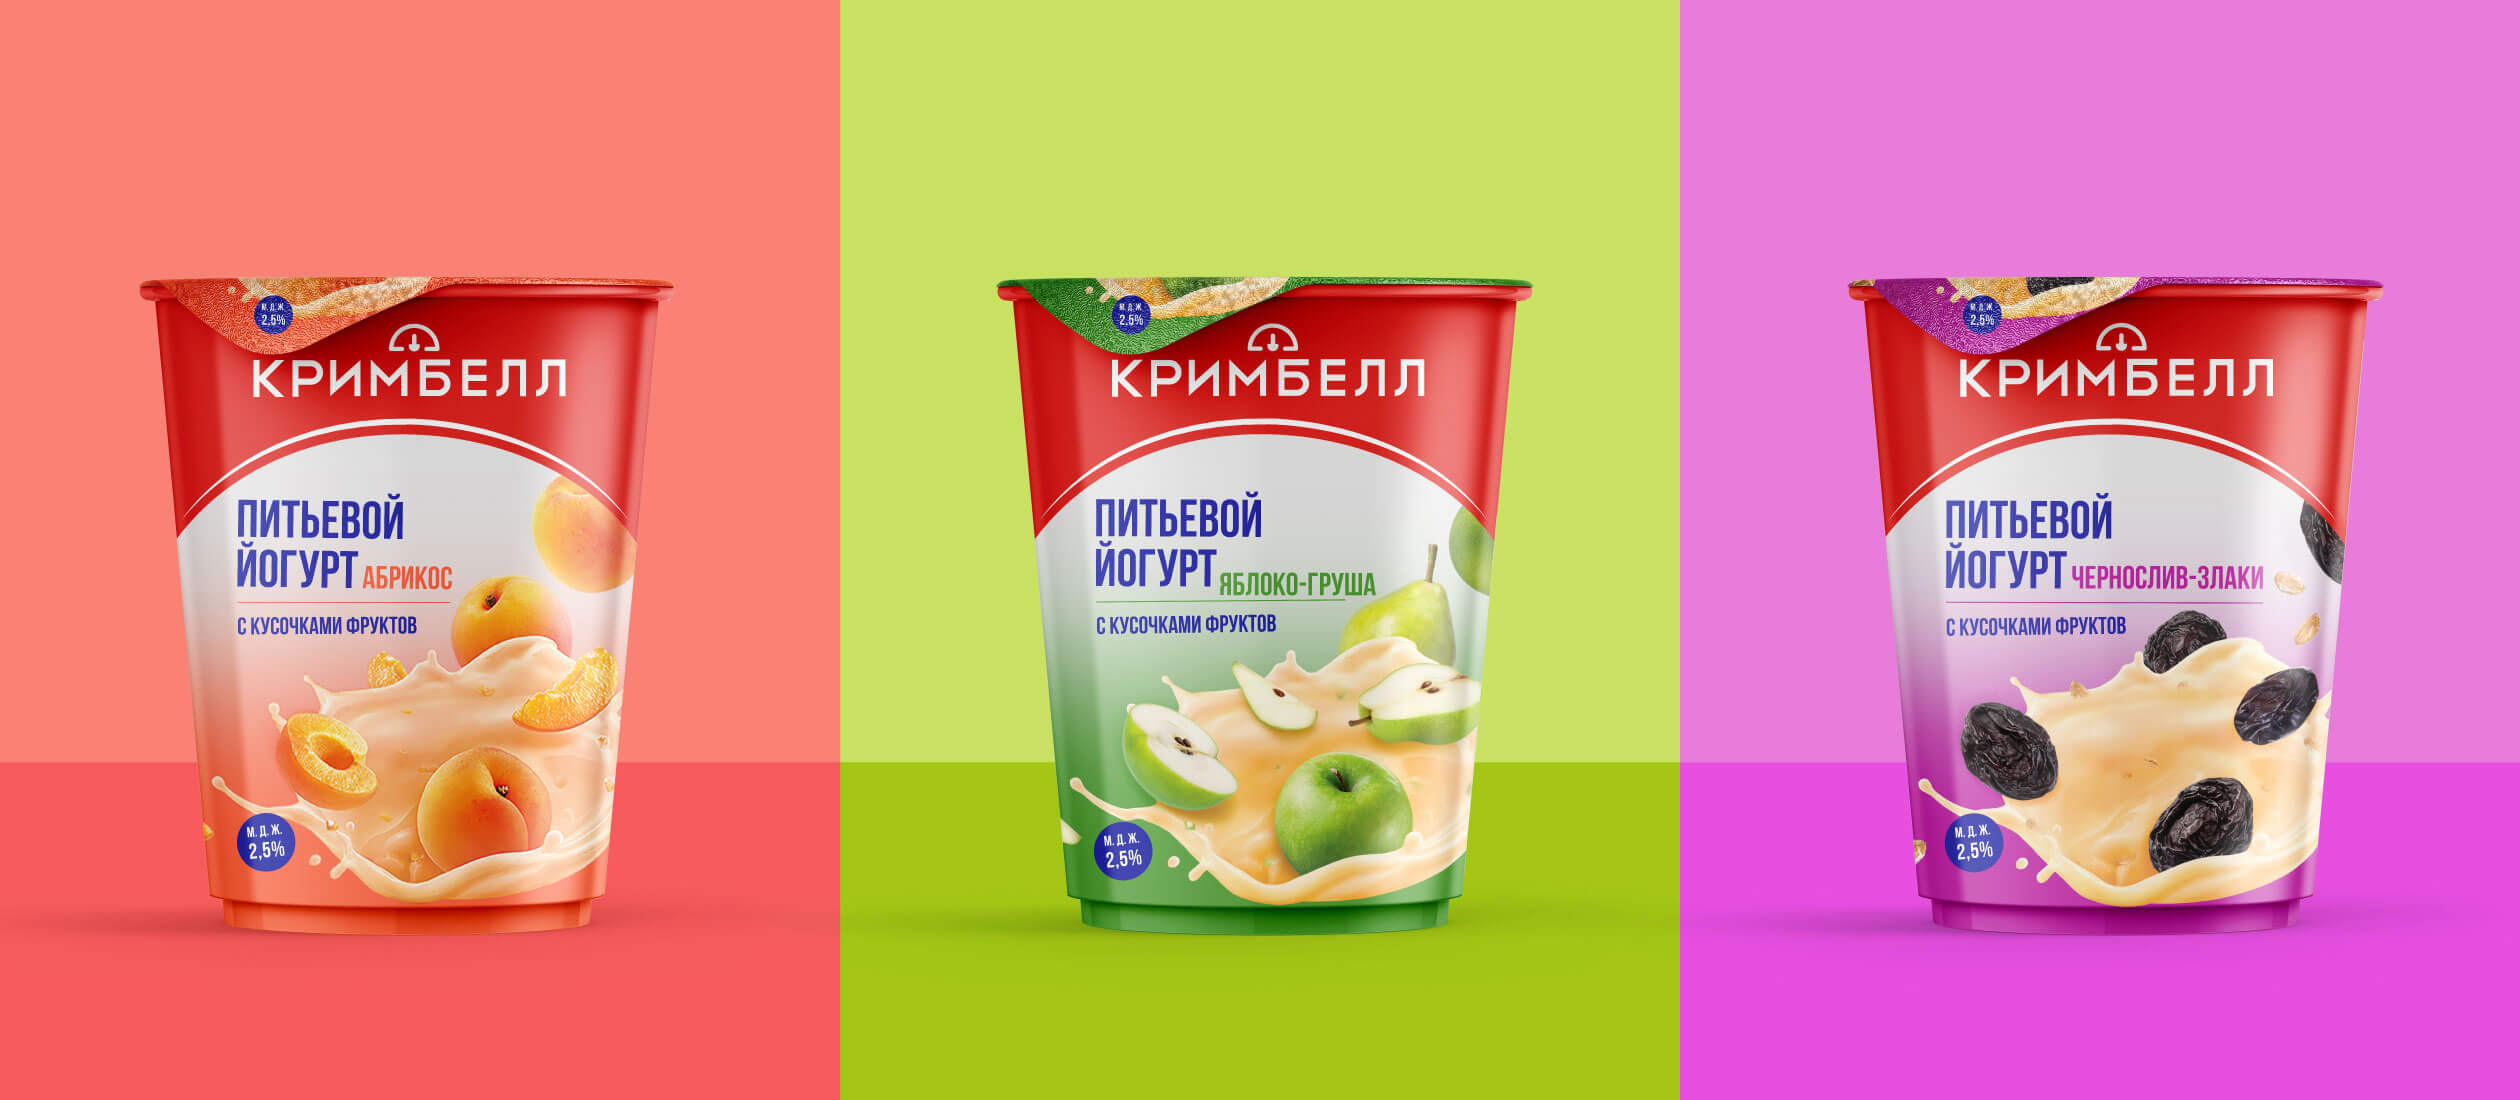 21.-Creambell-Russia-Dairy